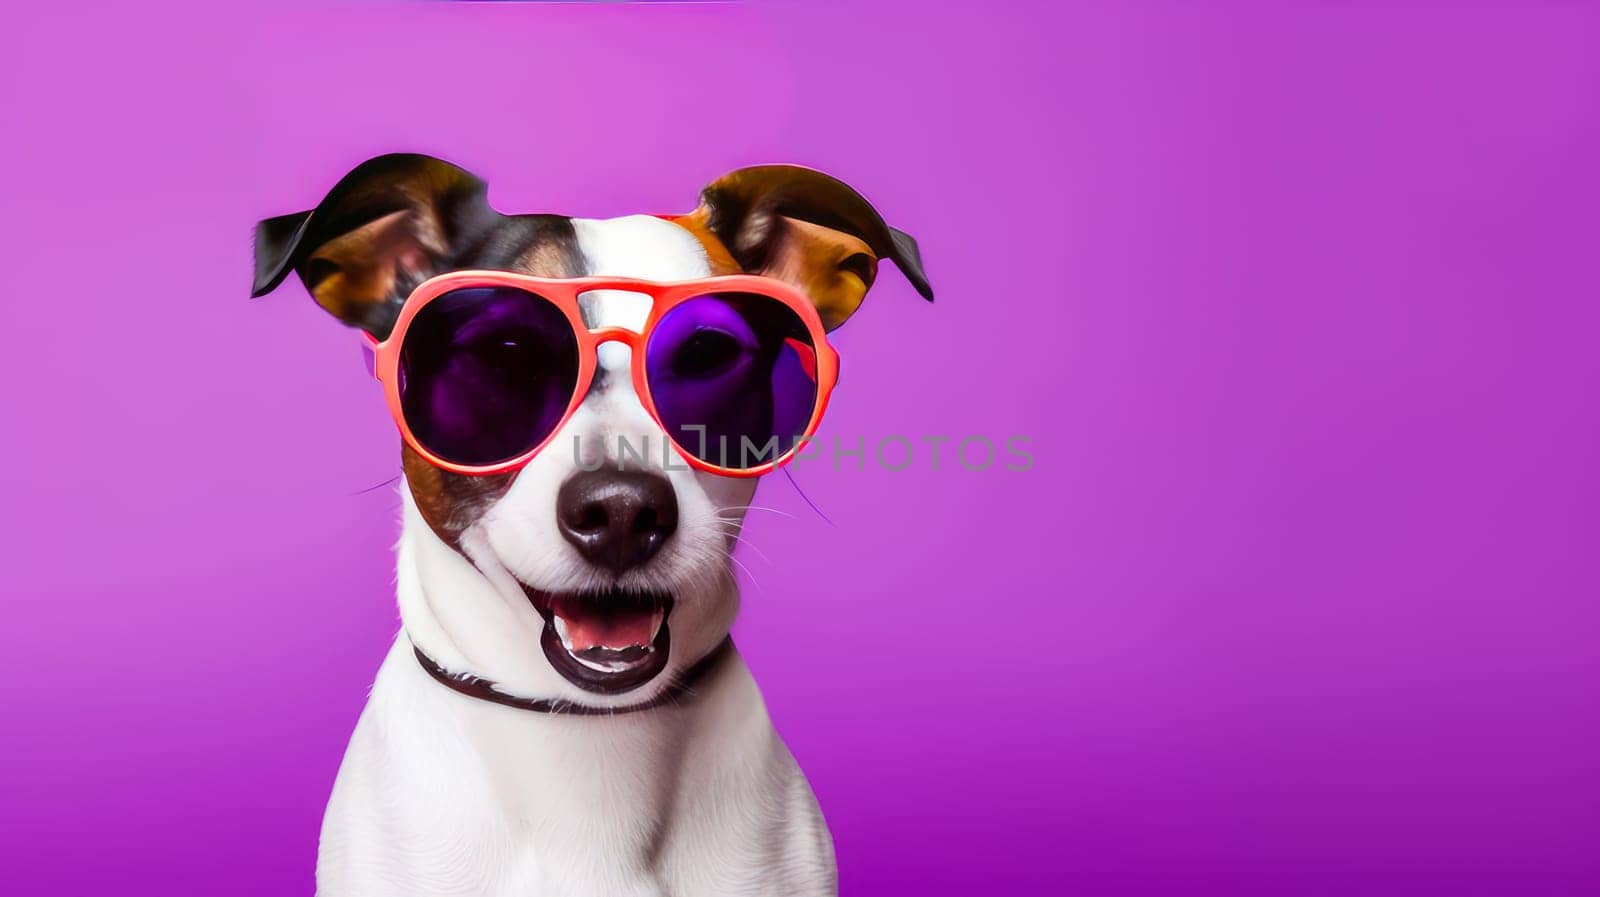 Happy, contented dog wearing sunglasses during vacation or vacation on a purple background. Advertising holidays for animals, travel agency, pet store, modern training and courses